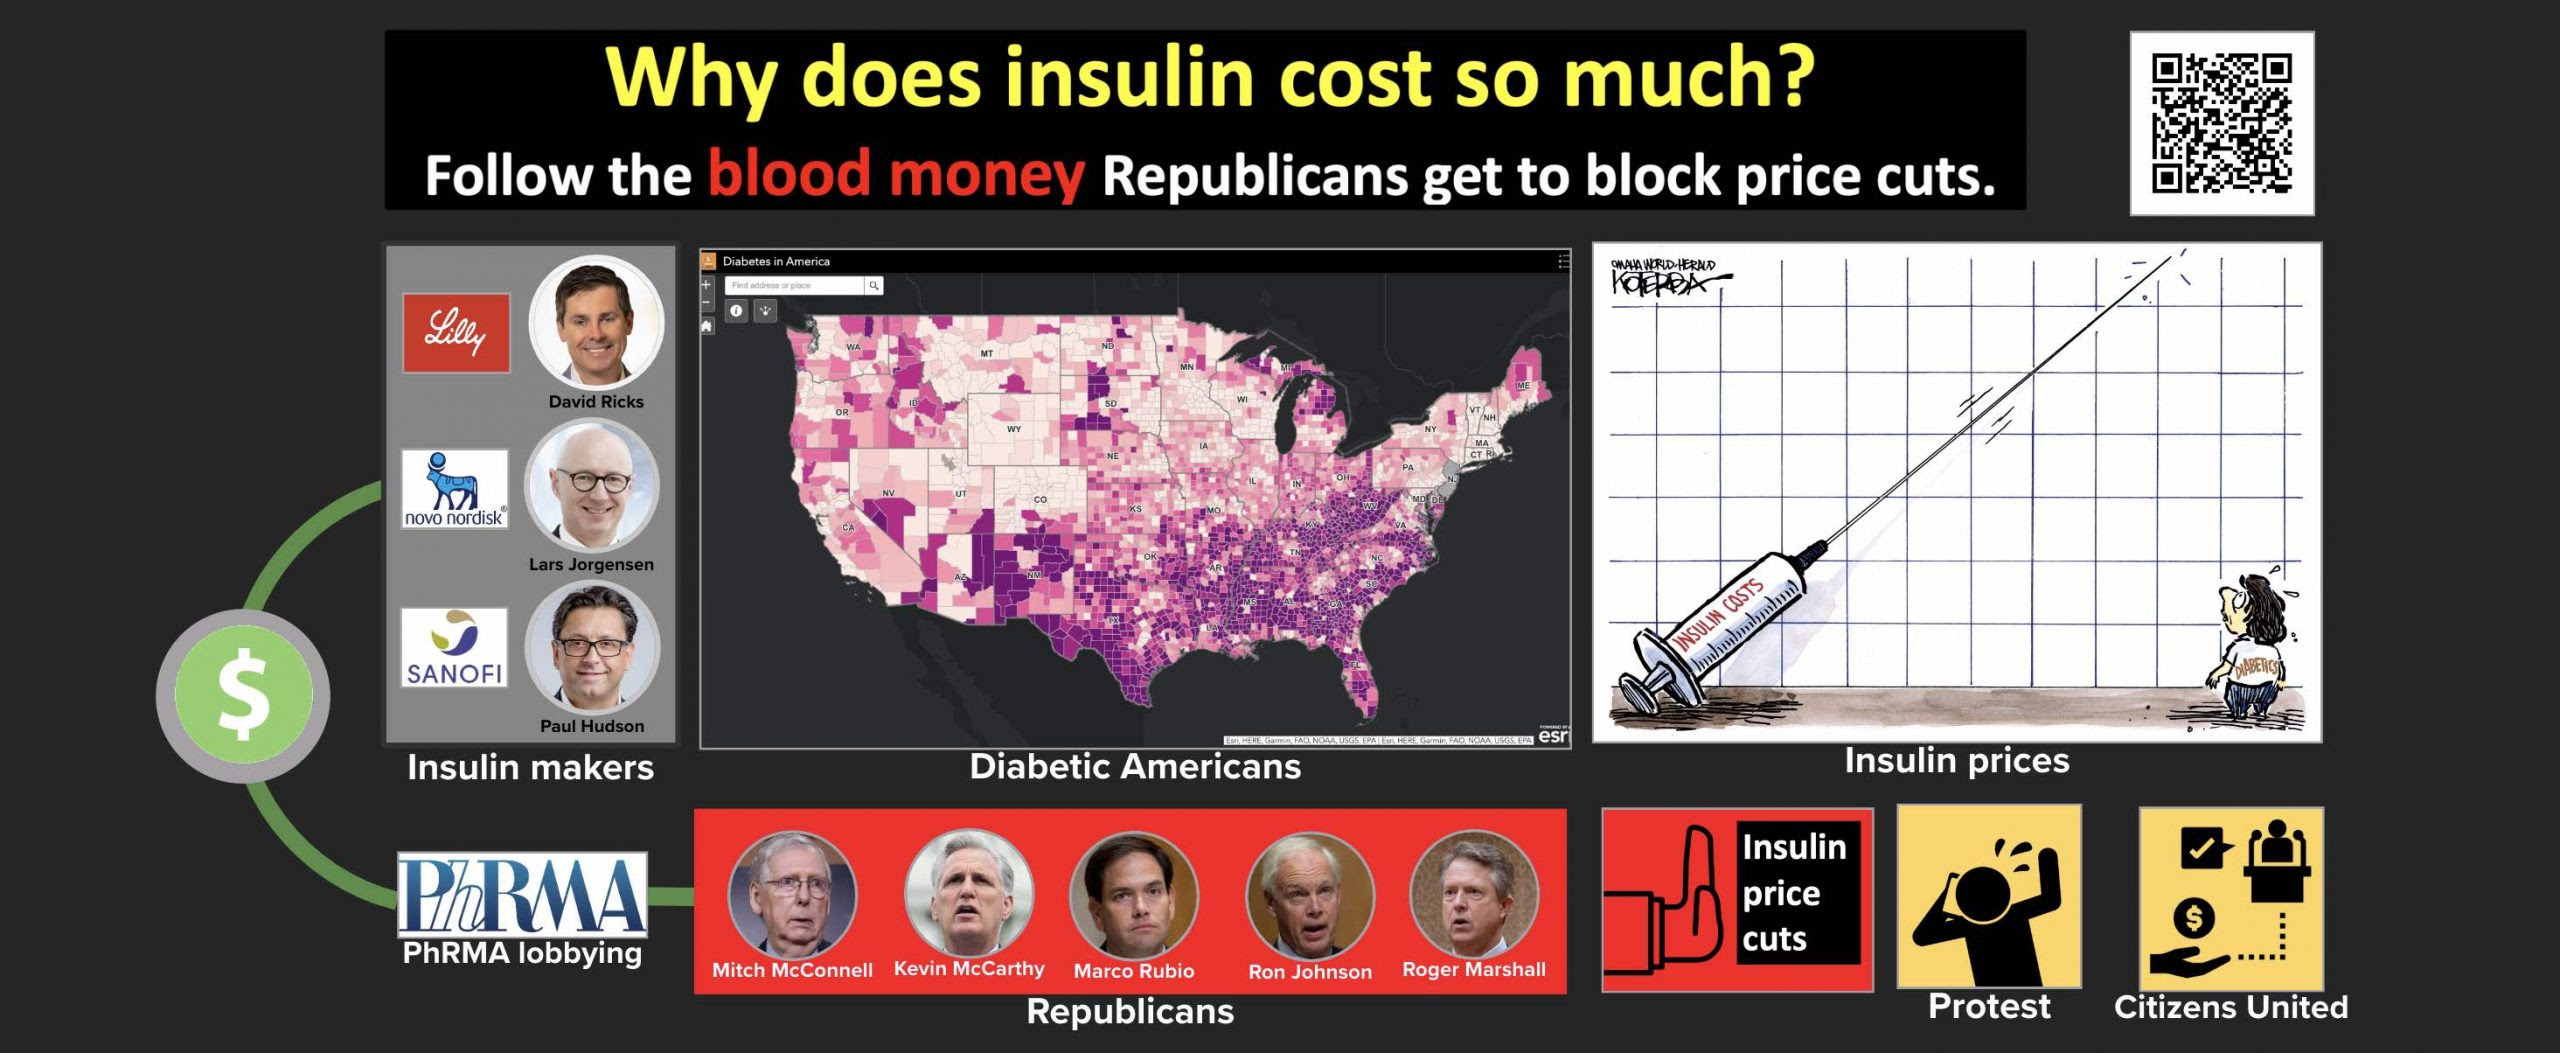 Drug lobby pays Republicans to block Insulin price cut reforms